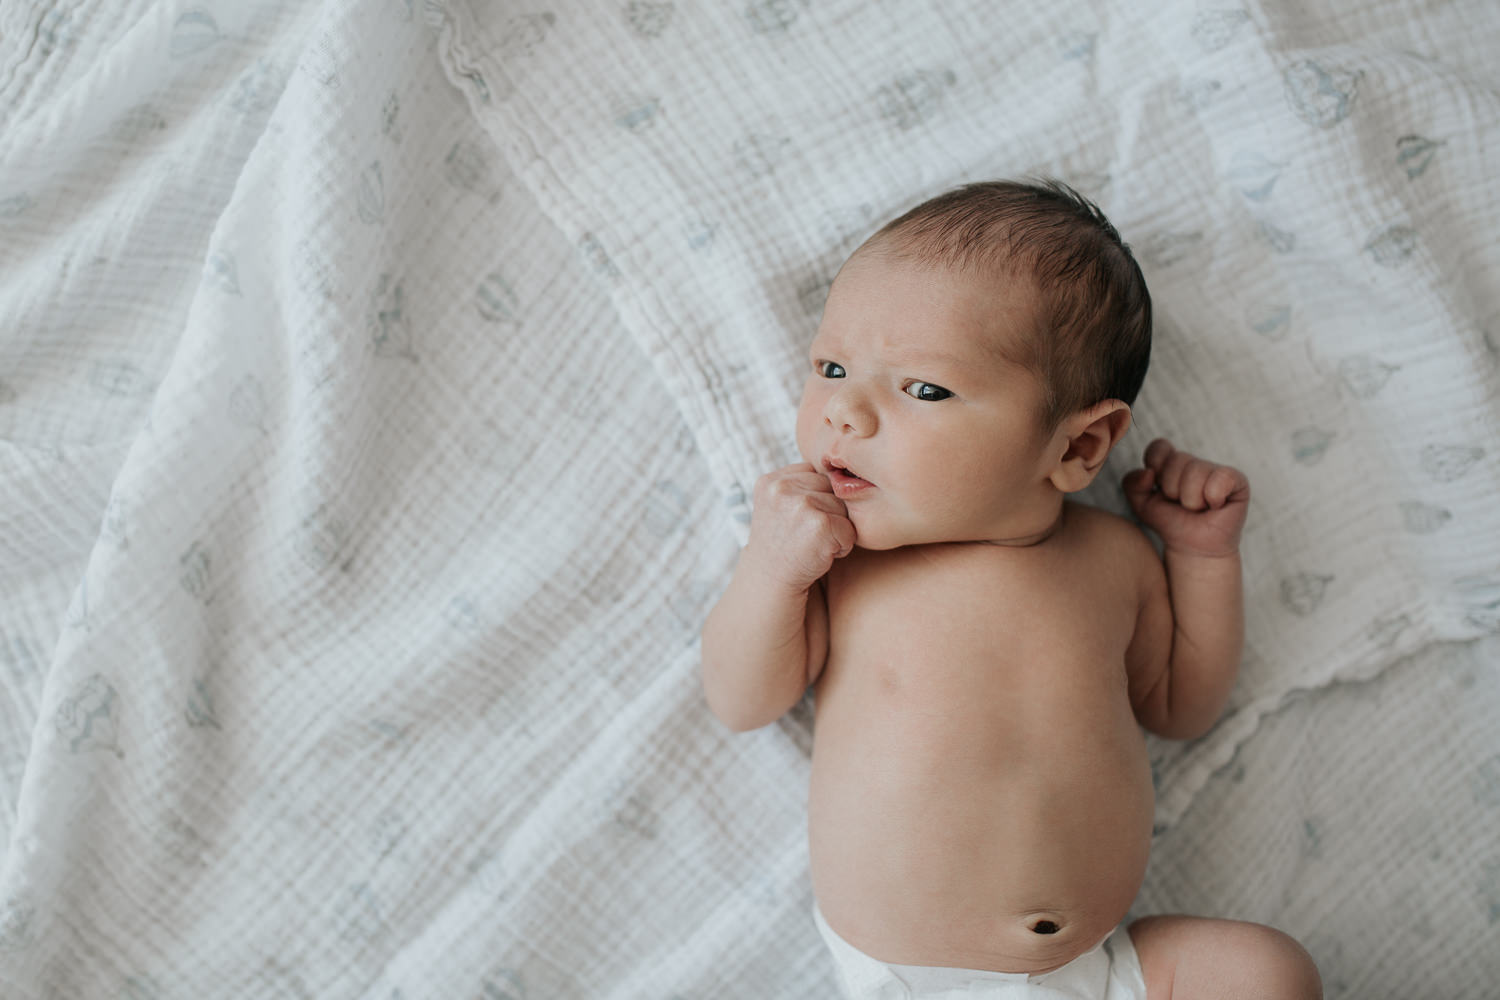 2 week old baby boy with dark hair and eyes lying on swaddle in diaper, eyes open, hands up near face - York Region Lifestyle Photos